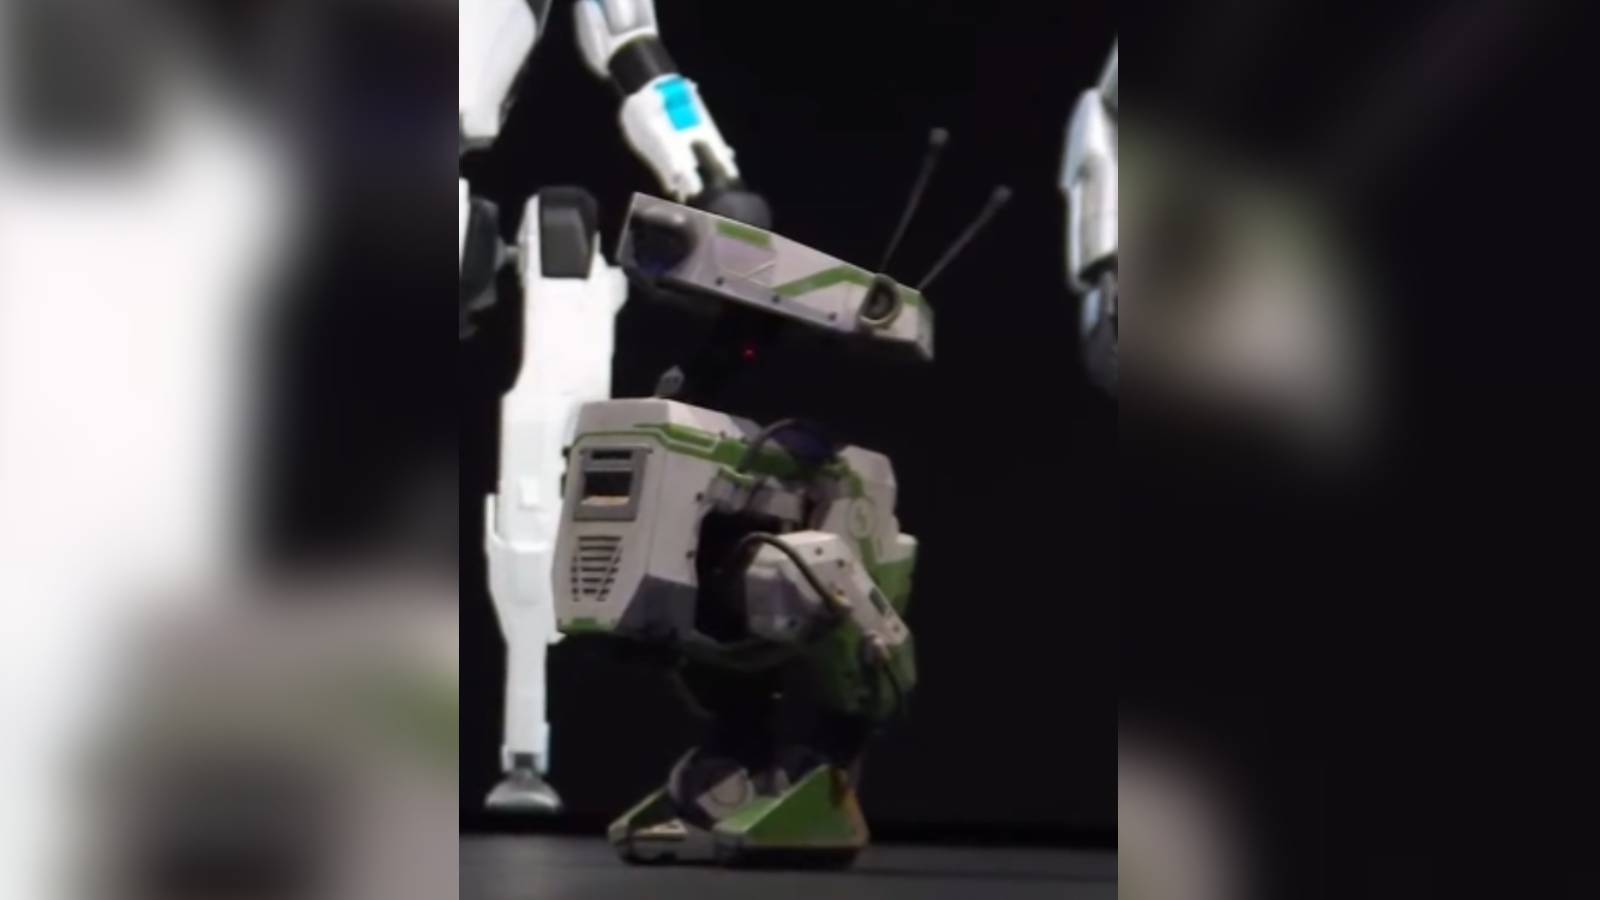 Screenshot of the cnetdotcom footage of Jensen Huang's keynote at GTC 2024, featuring the green BD-X Star Wars droid.